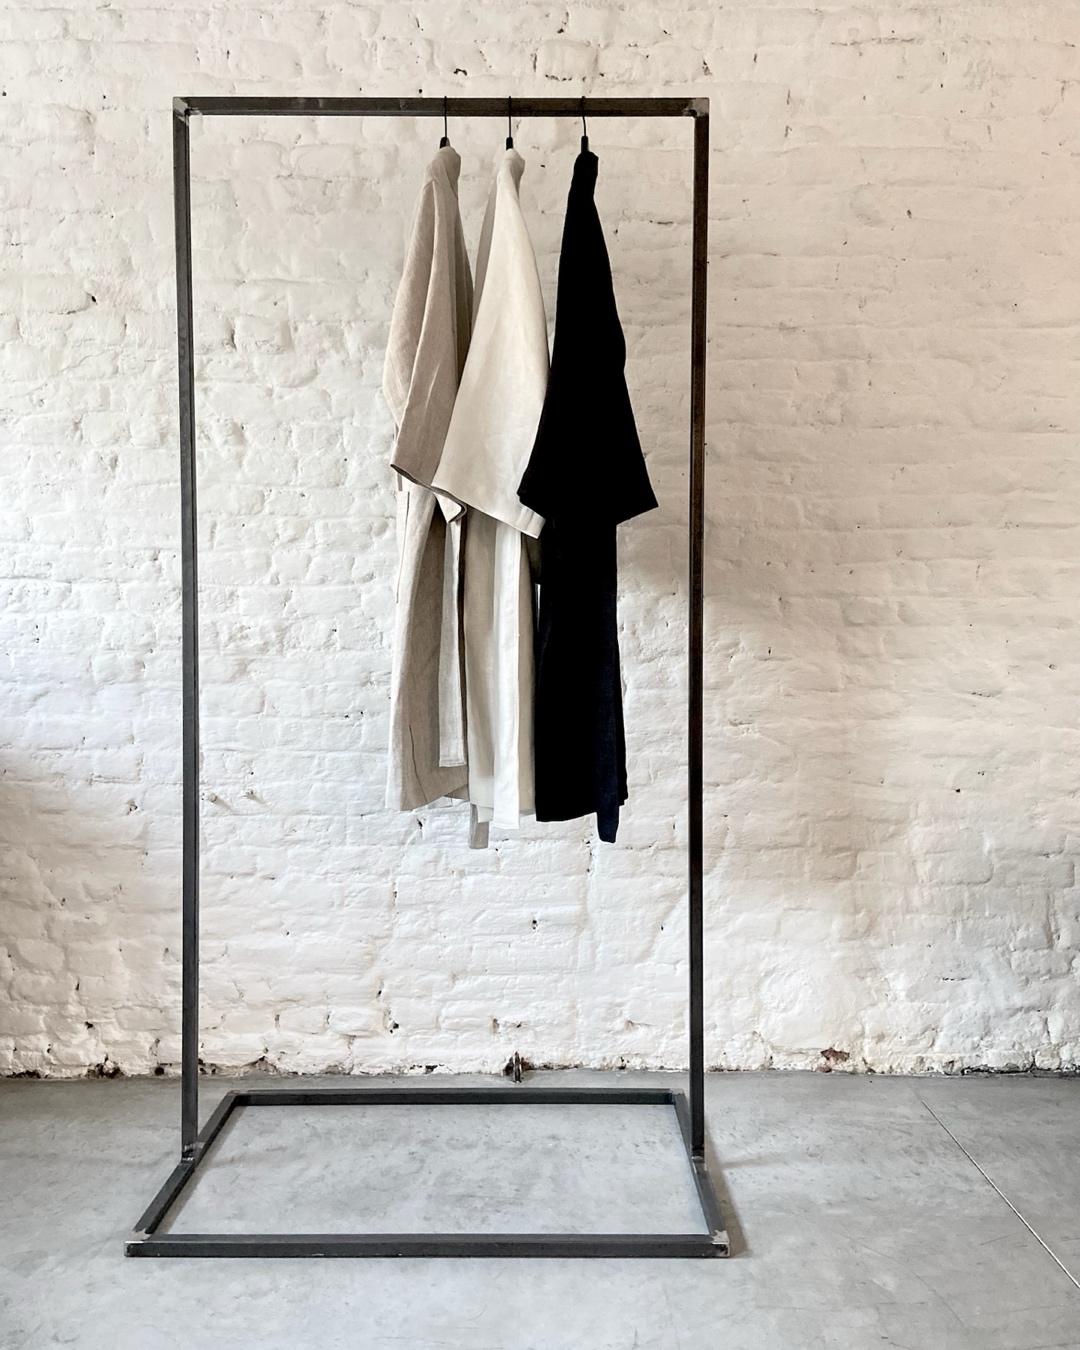 XL Clothing Rack by LINFIN Maastricht